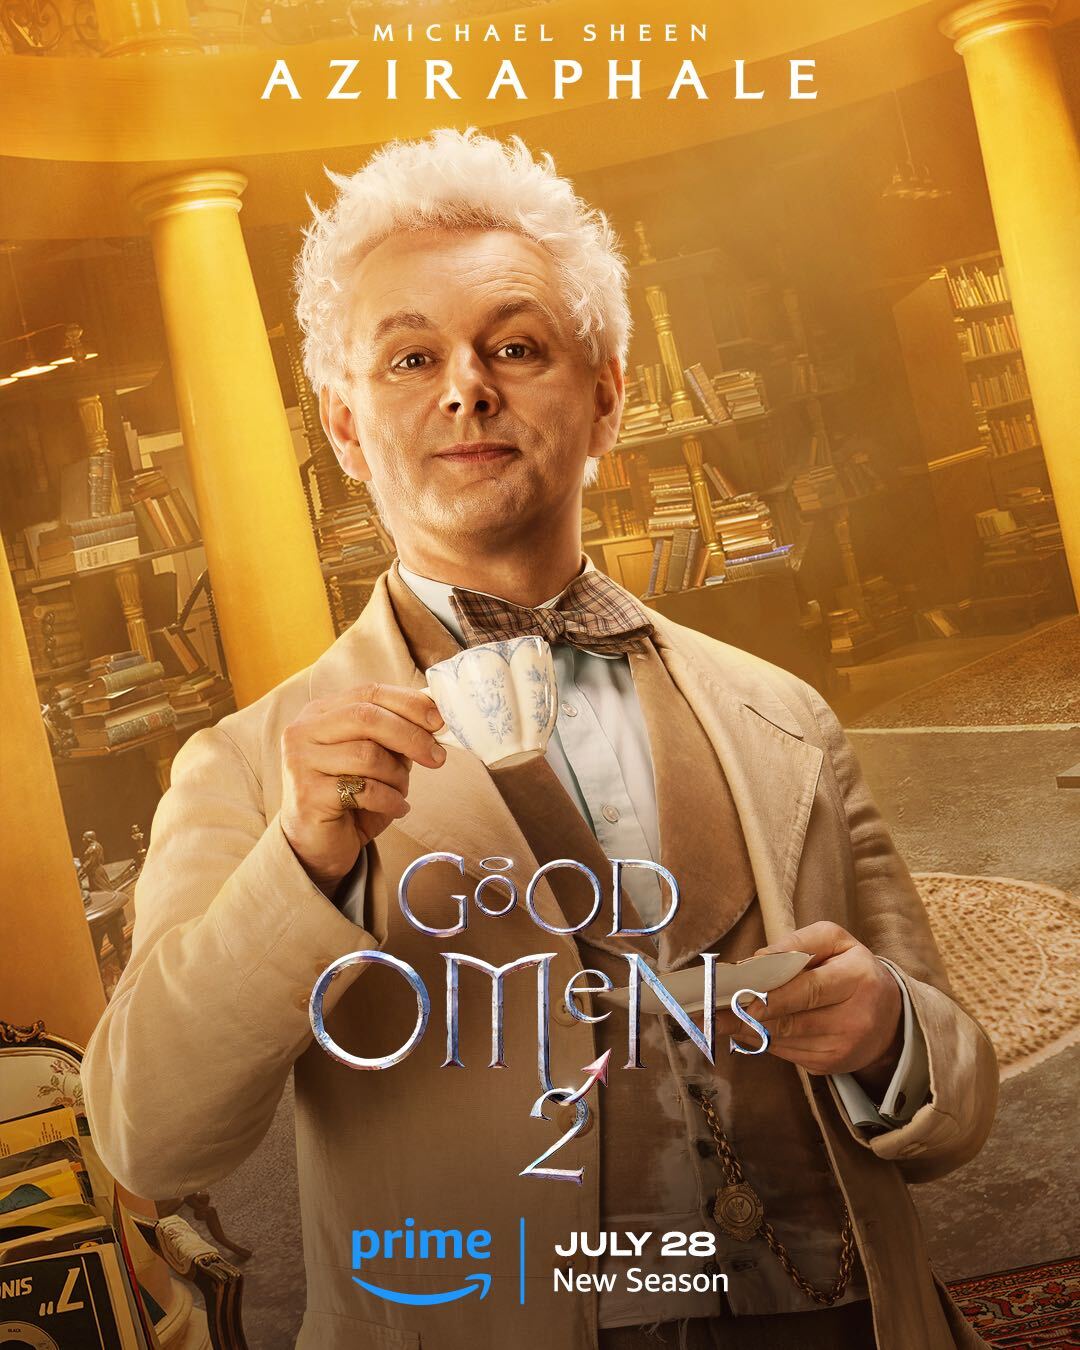 Global hit TV show Good Omens to shoot entire Second Series in Scotland